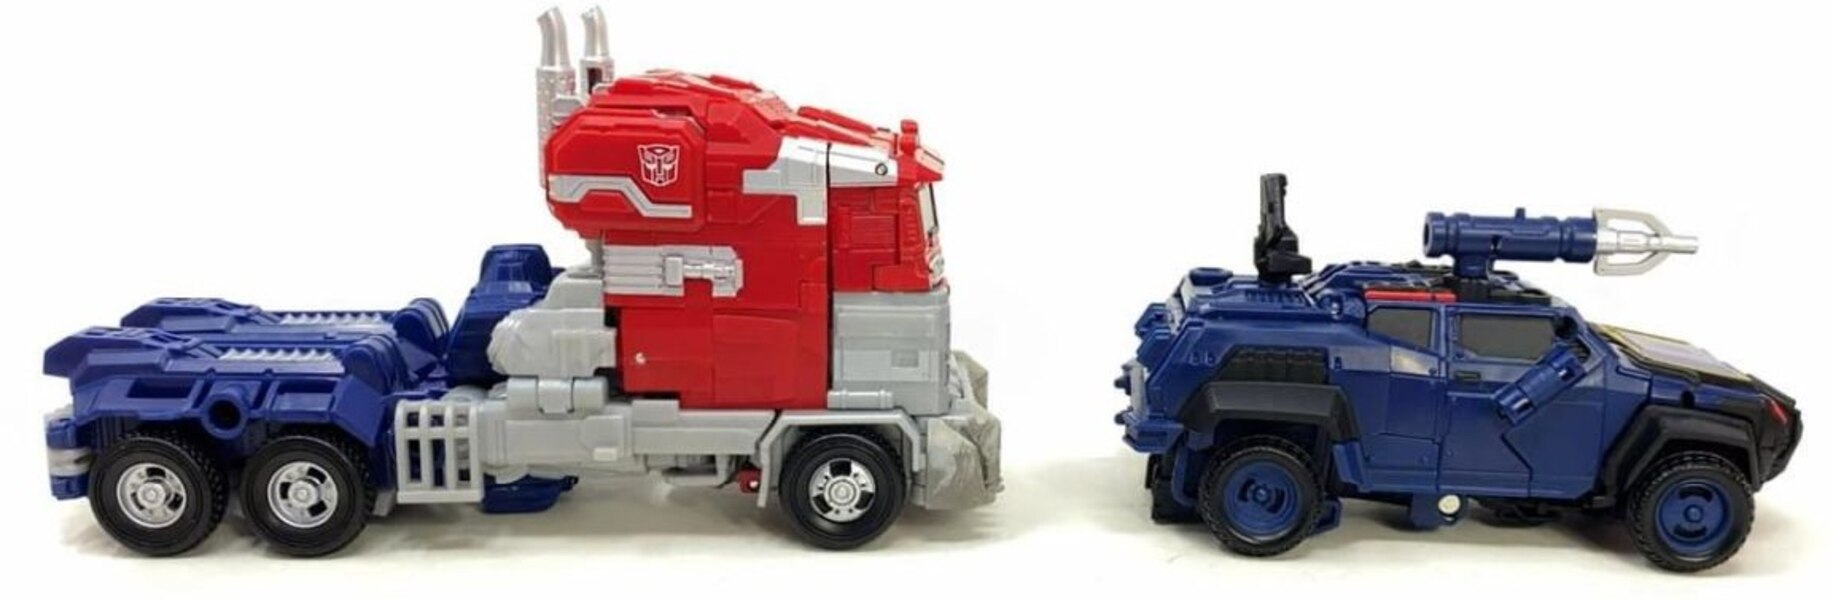 Image Of Reactivate Optimus Prime & Soundwave Transformers Game Toys  (11 of 12)